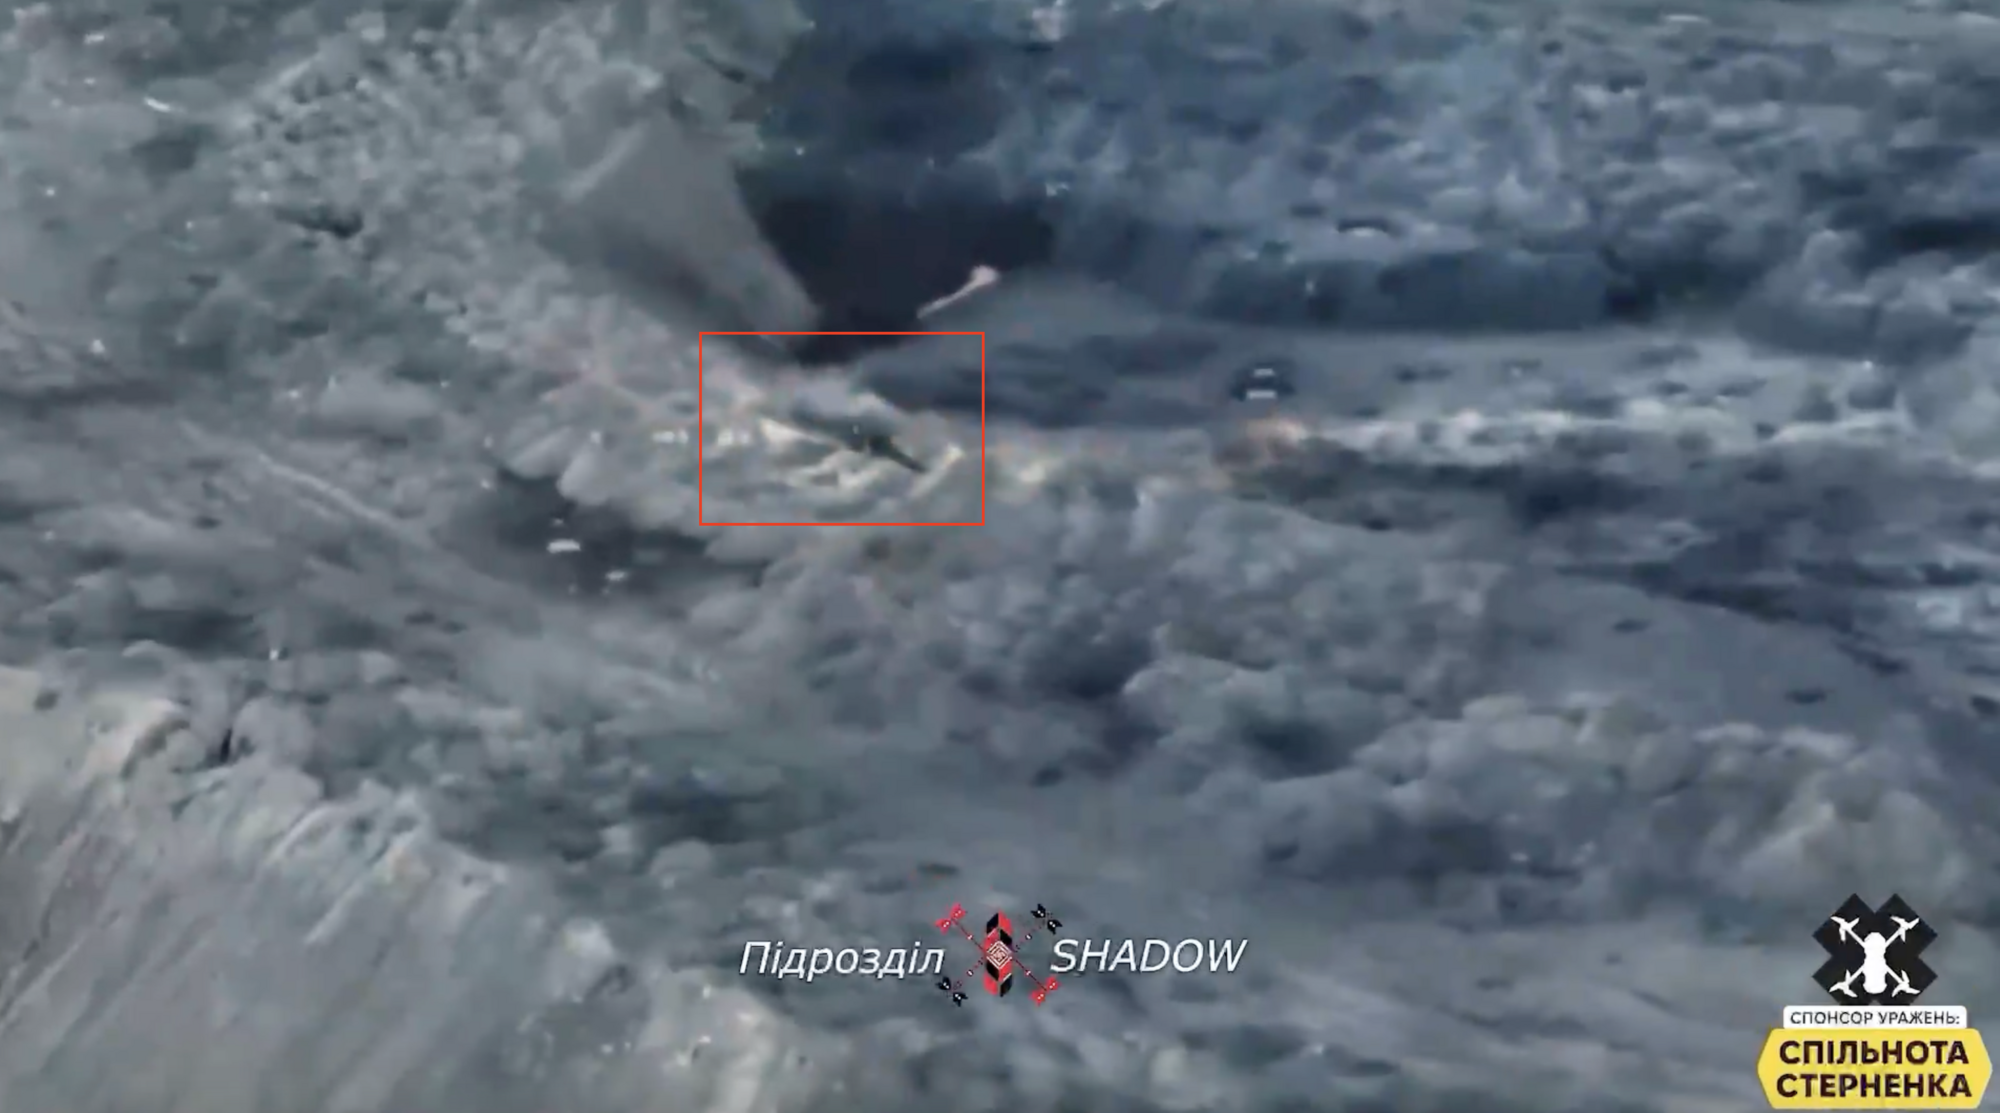 Didn't stay for long: AFU destroys Russian flags on Avdiivka's slag heap with a drone. Video